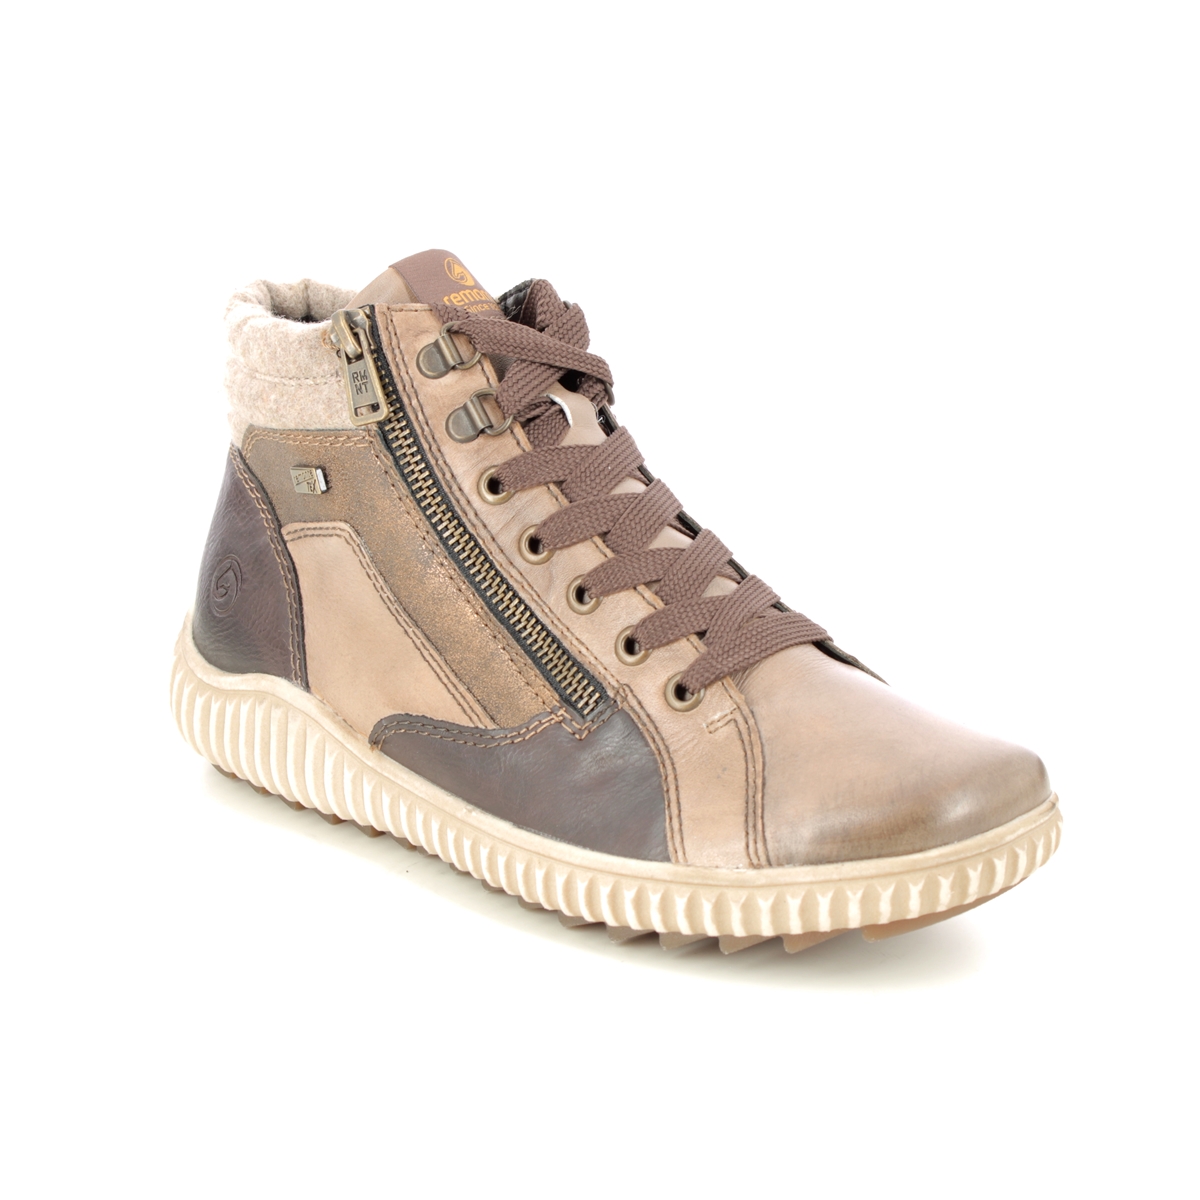 Remonte Wiser Zip Tex Light Taupe Leather Womens Hi Tops R8271-20 In Size 38 In Plain Light Taupe Leather